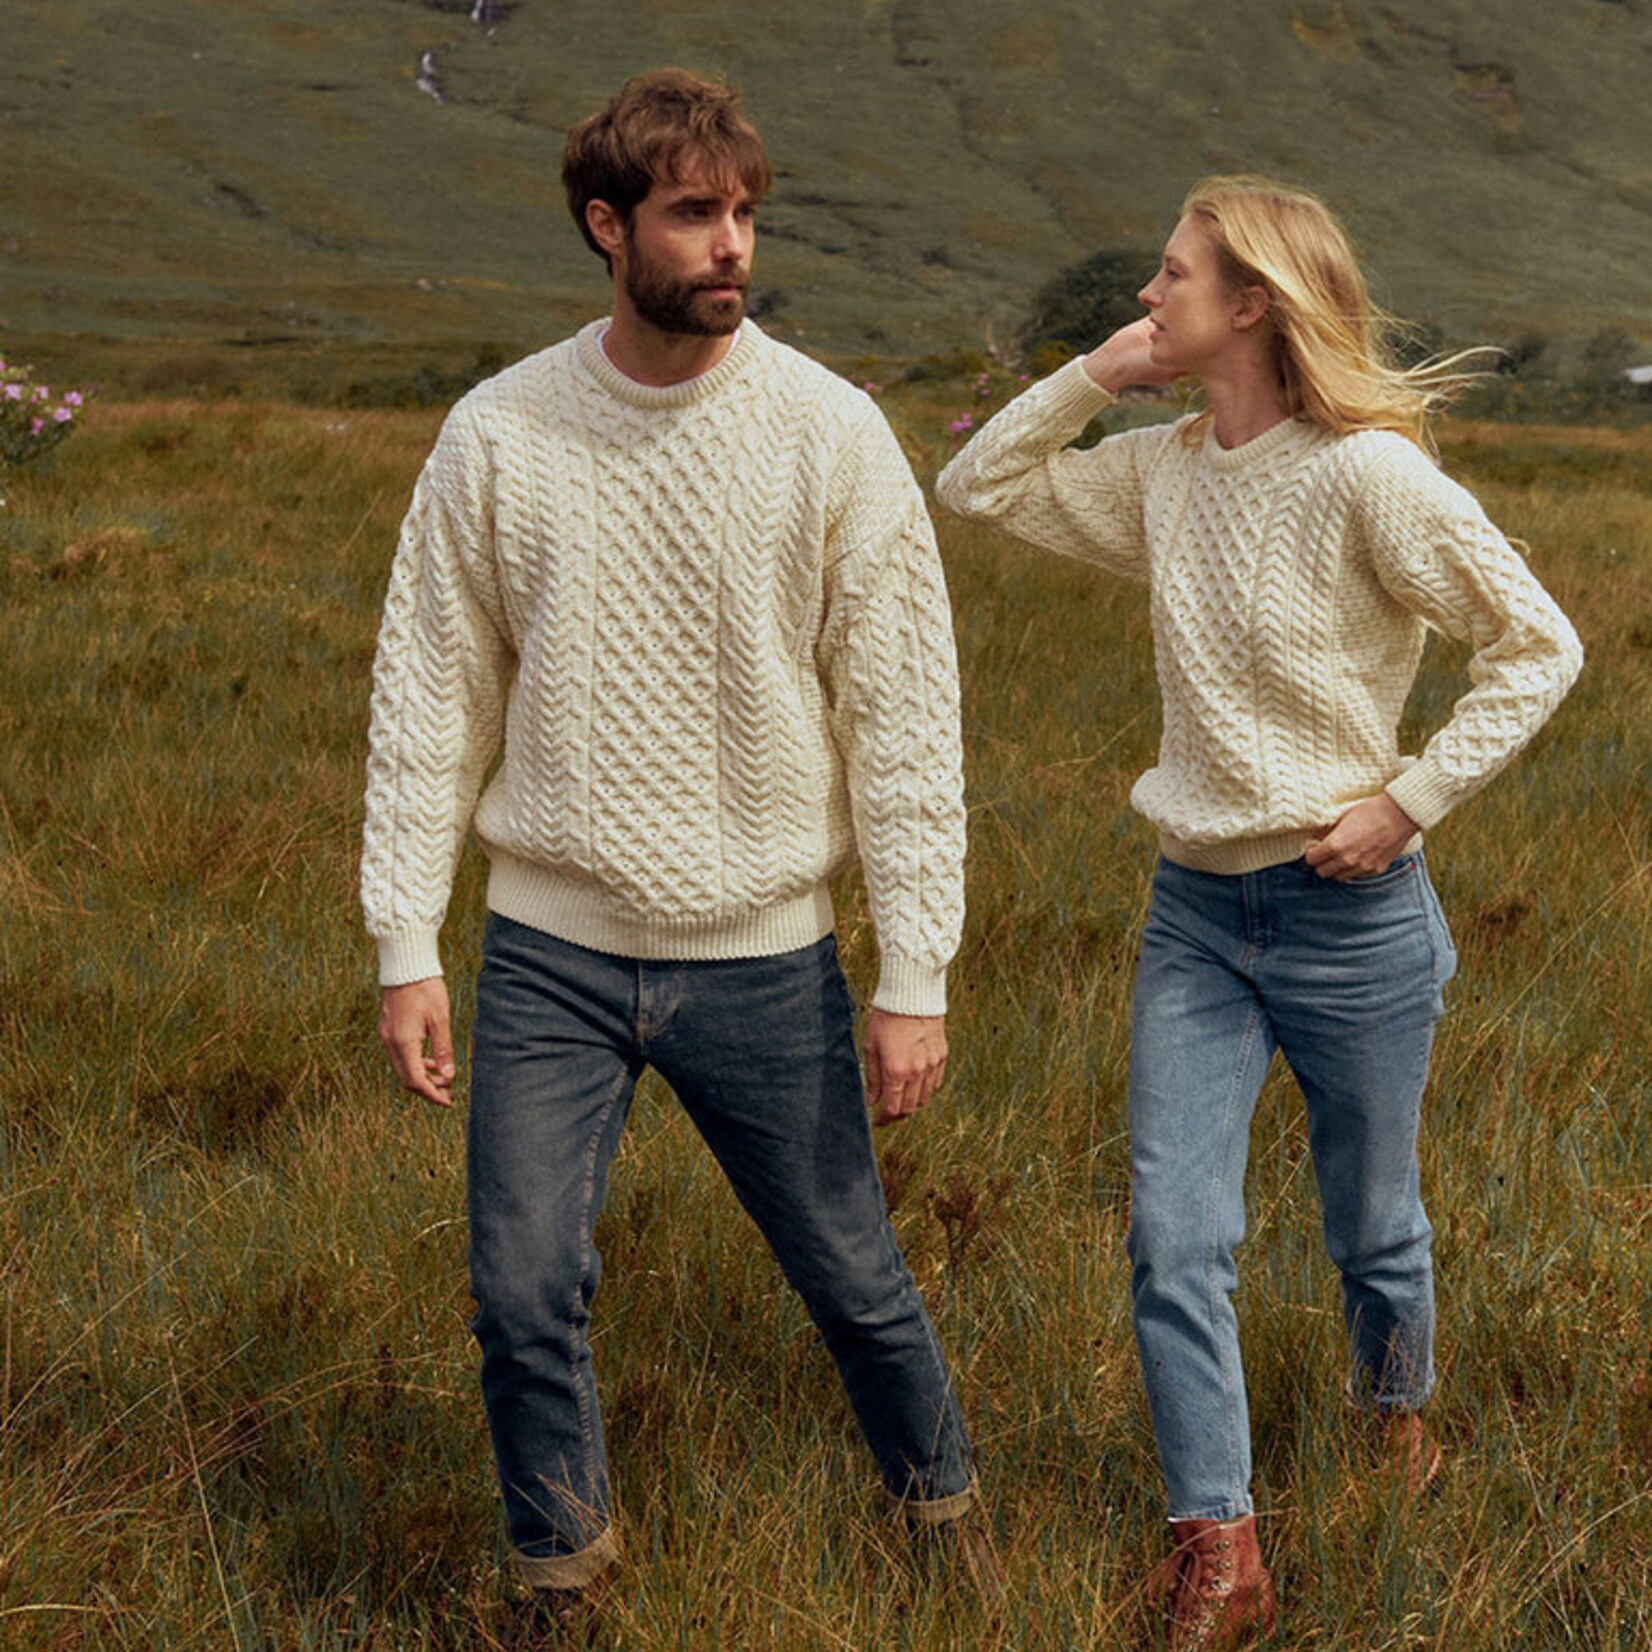 Women's Irish Clothing  Traditional Knitwear, Shirts & Accessories from  Ireland